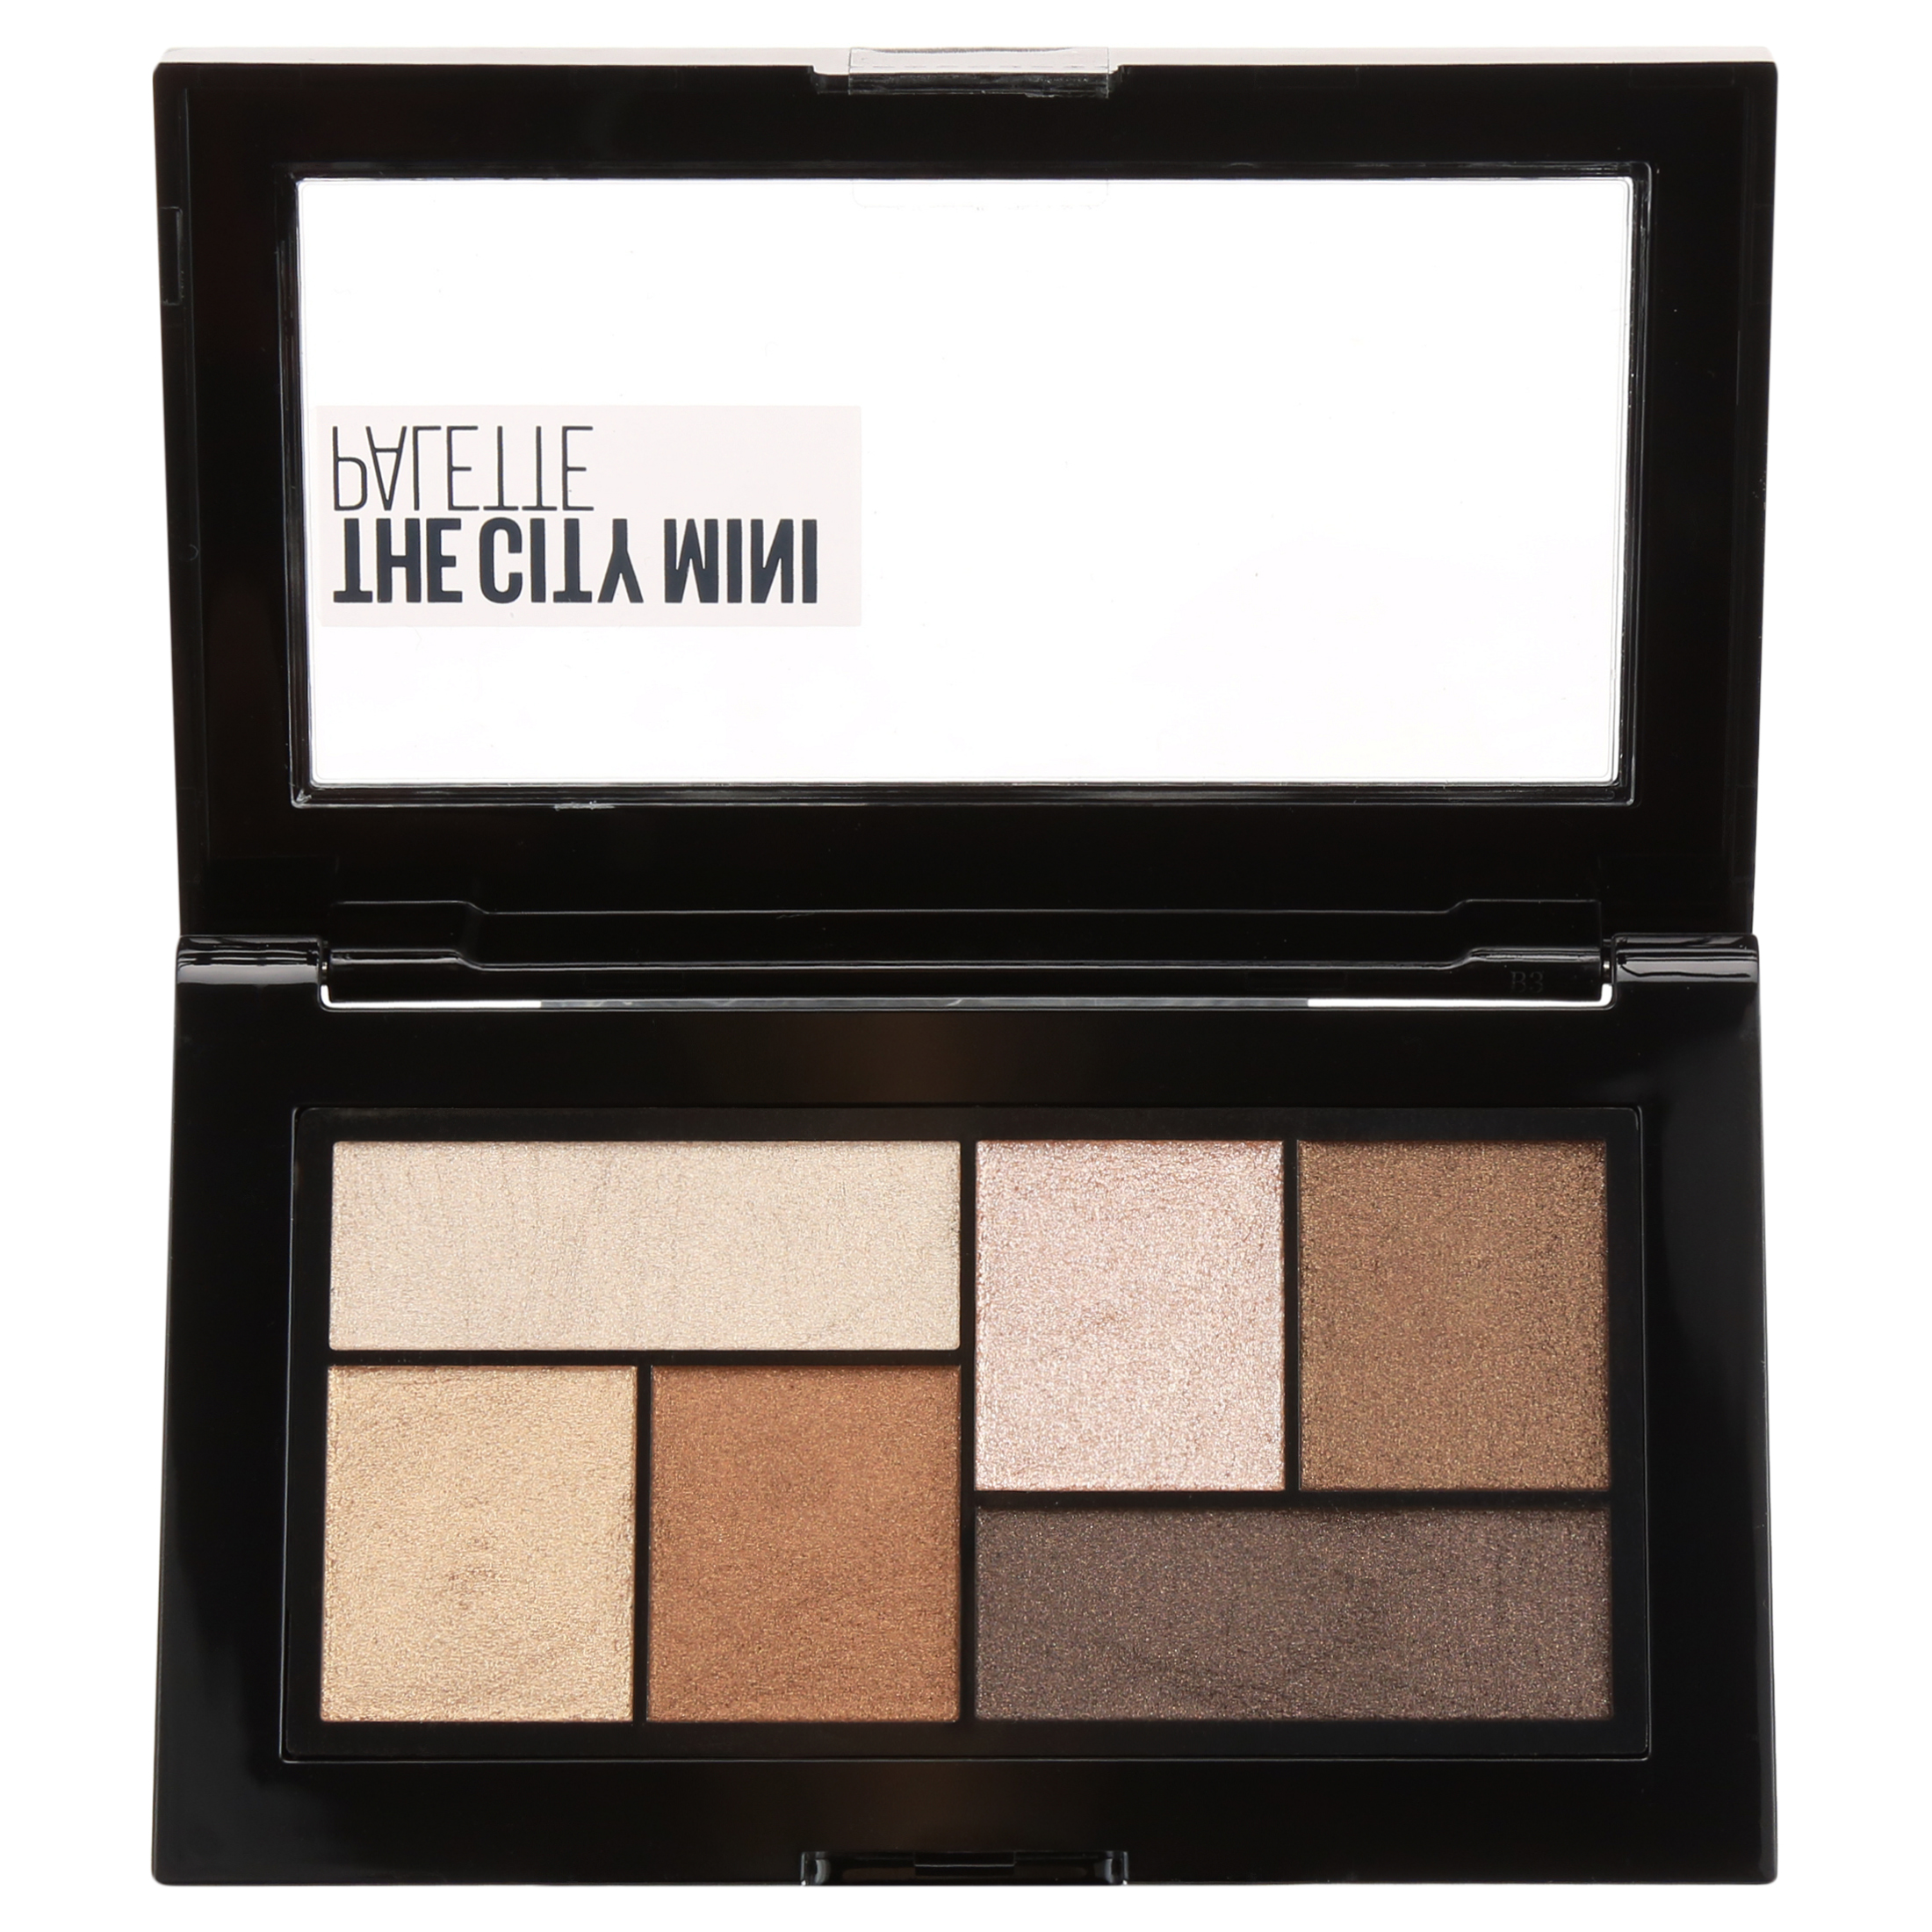 Maybelline The City Mini Eyeshadow Palette Makeup, Rooftop Bronzes - image 5 of 10